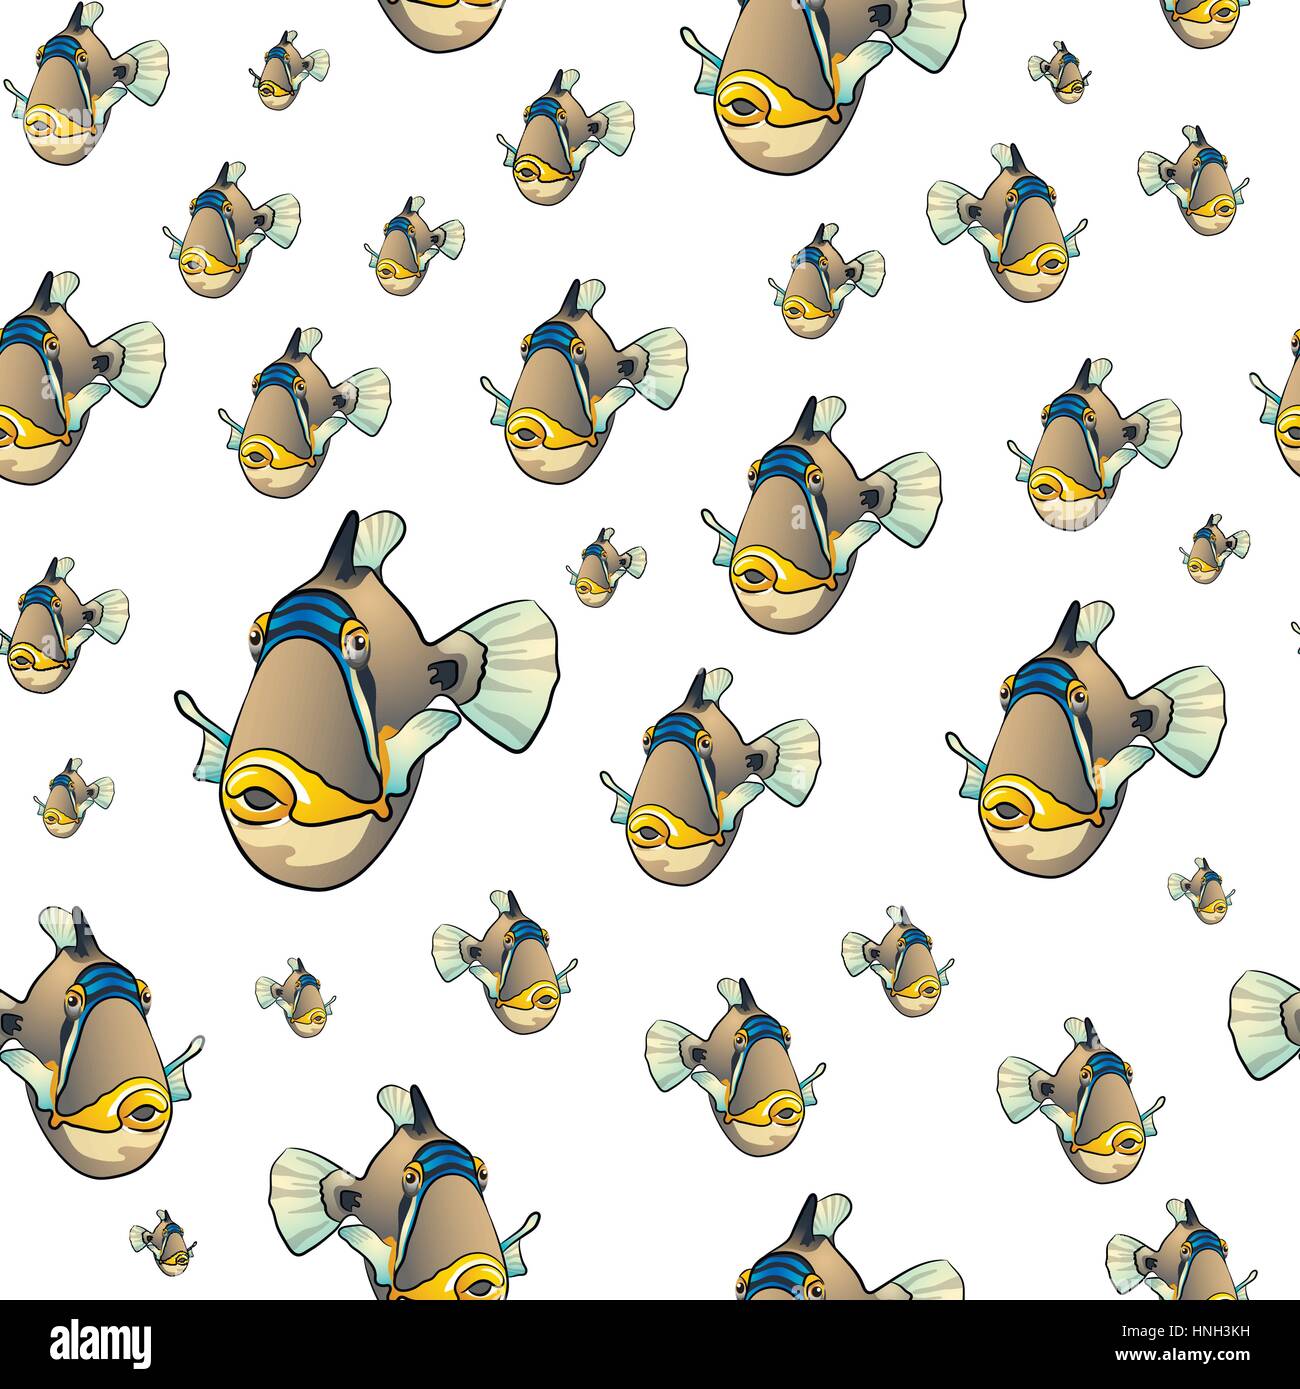 Picasso triggerfish pattern Stock Vector